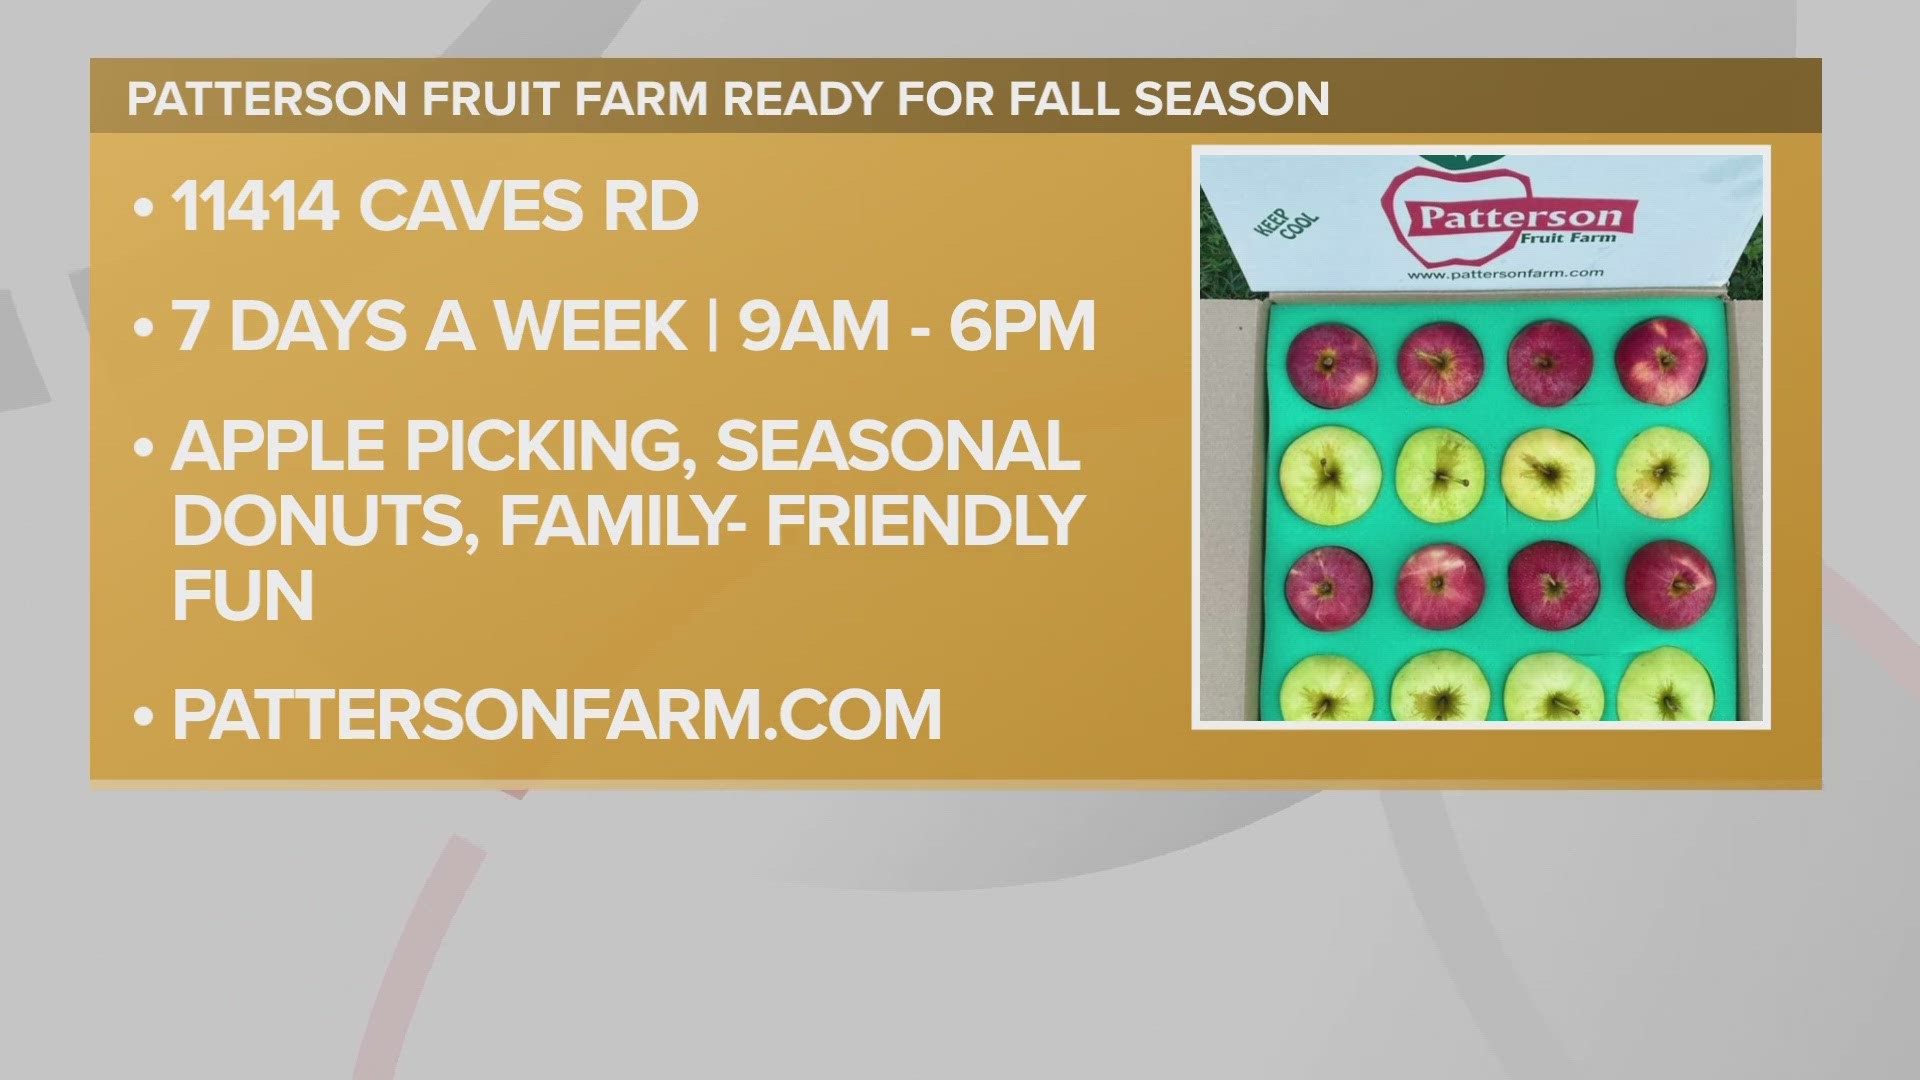 With fall officially underway, Patterson Fruit Farm is officially open!